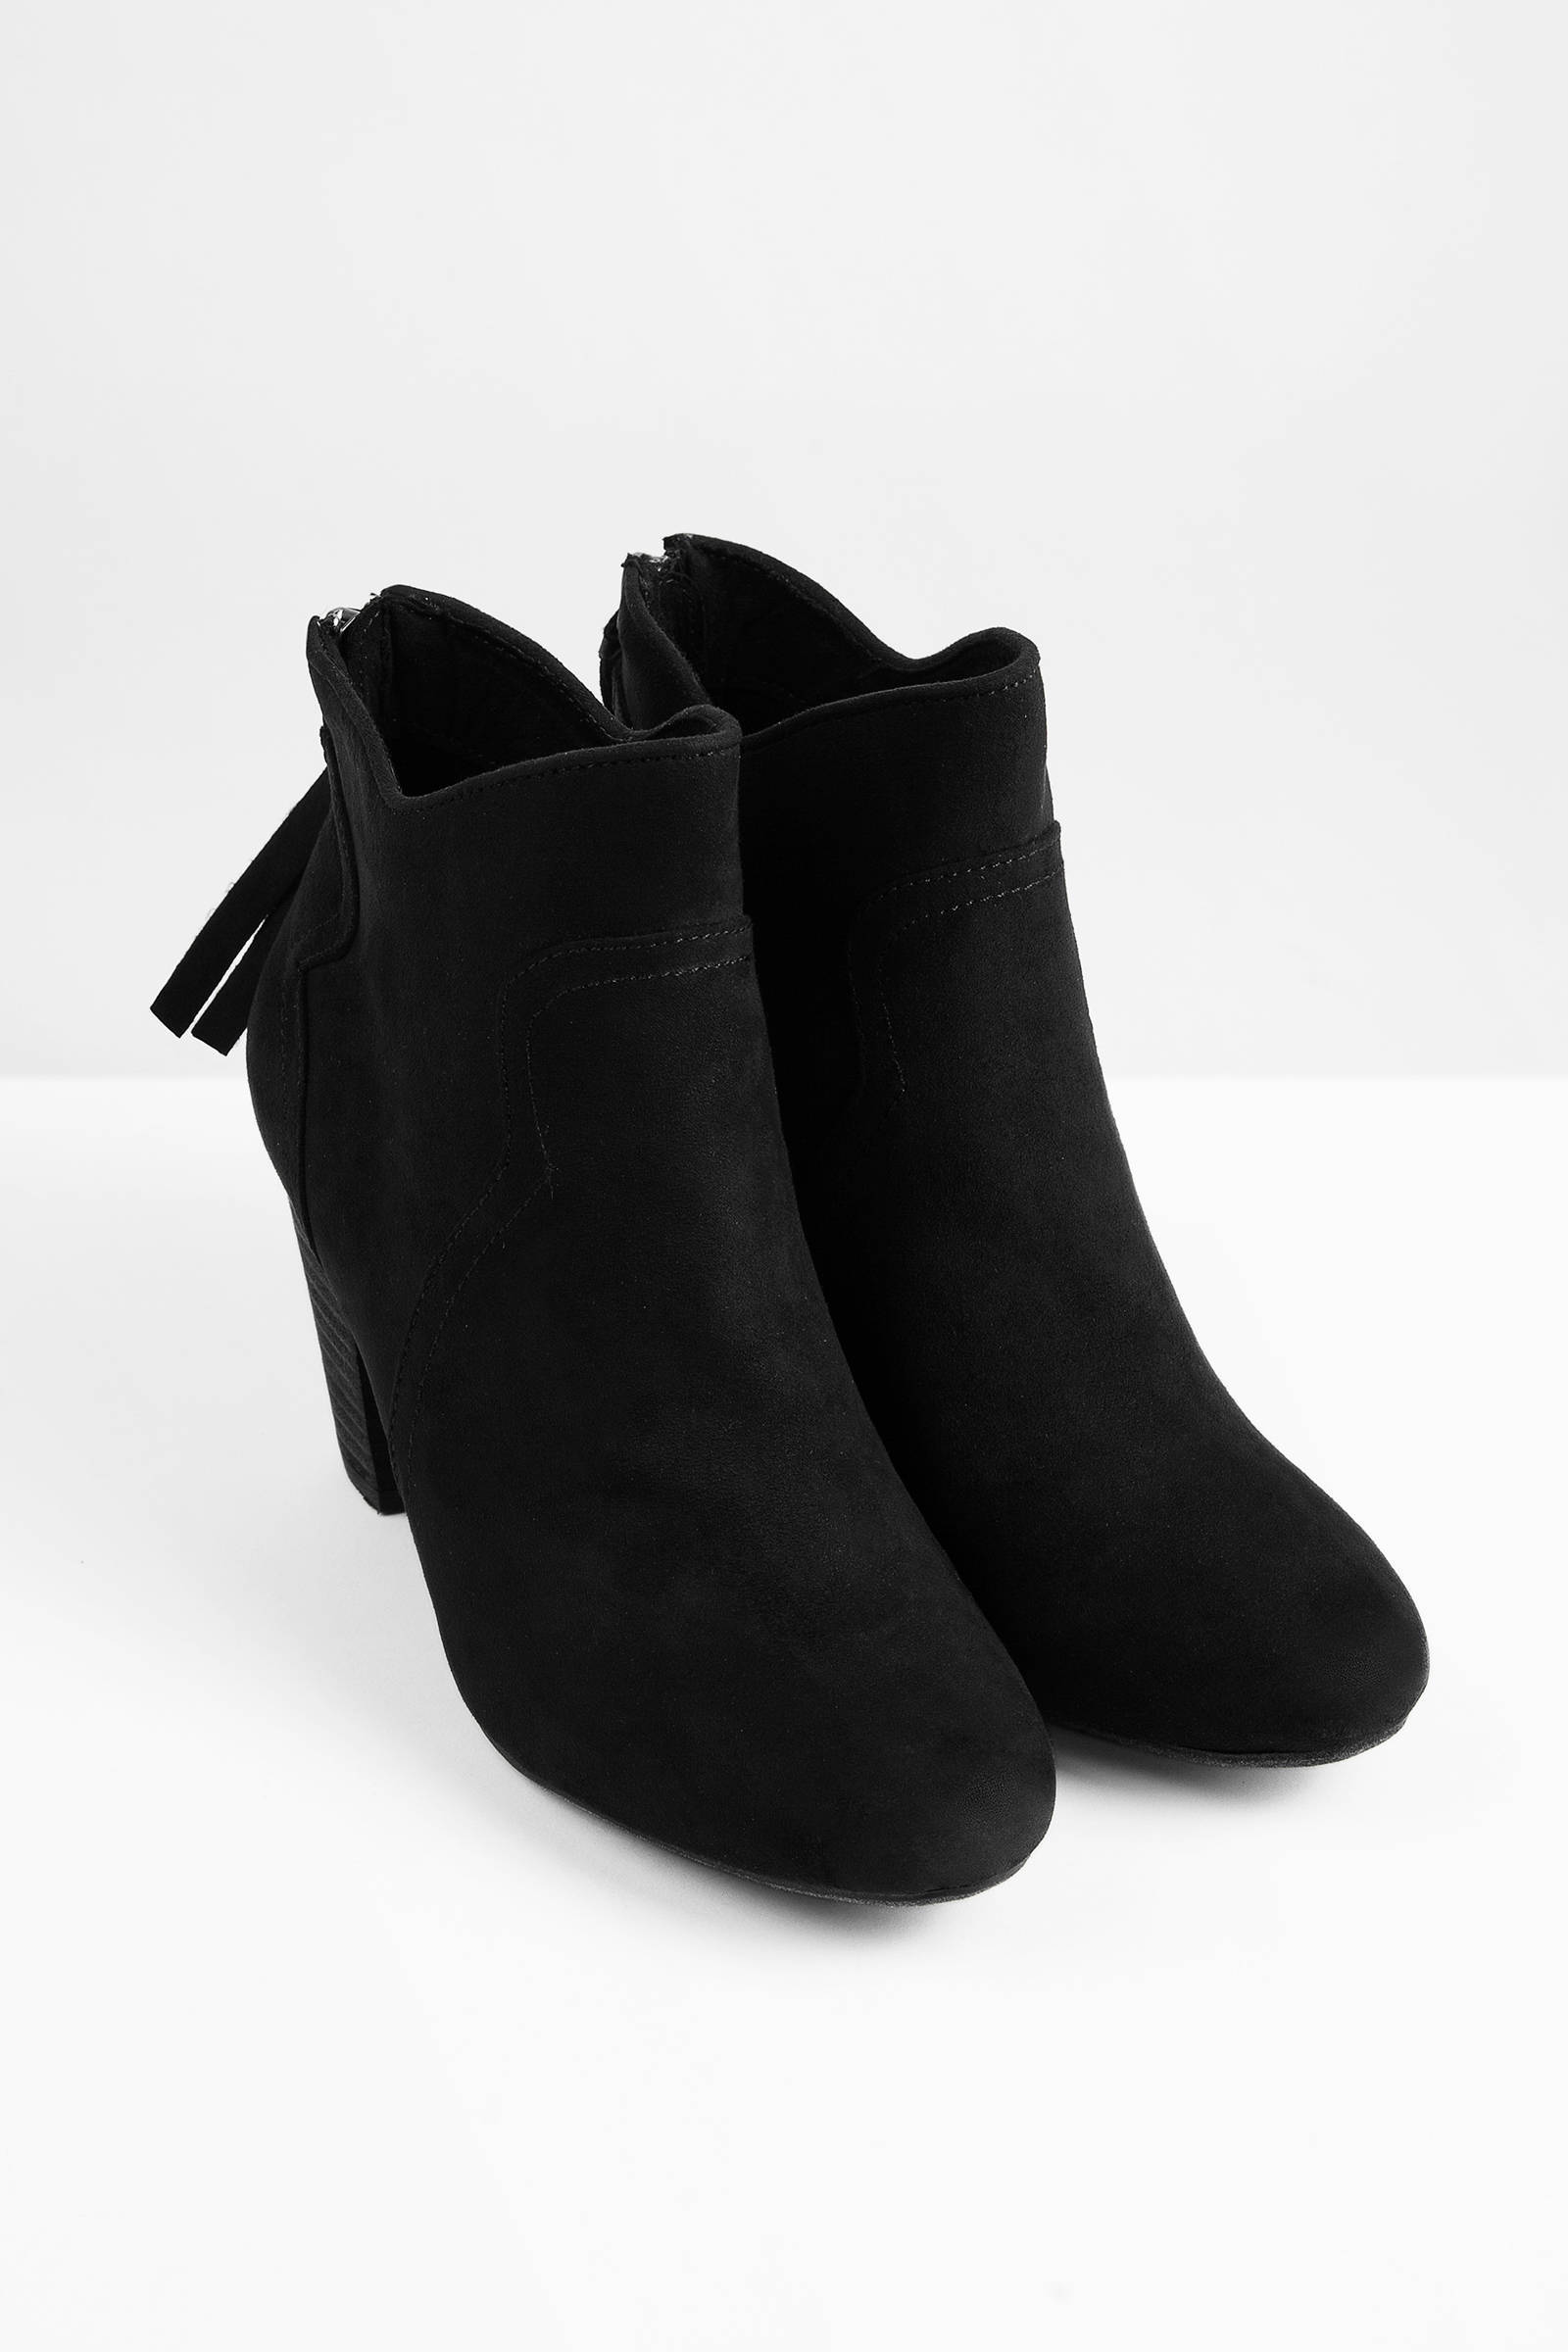 Martin Suede Ankle Boot in Black - $31 | Tobi US